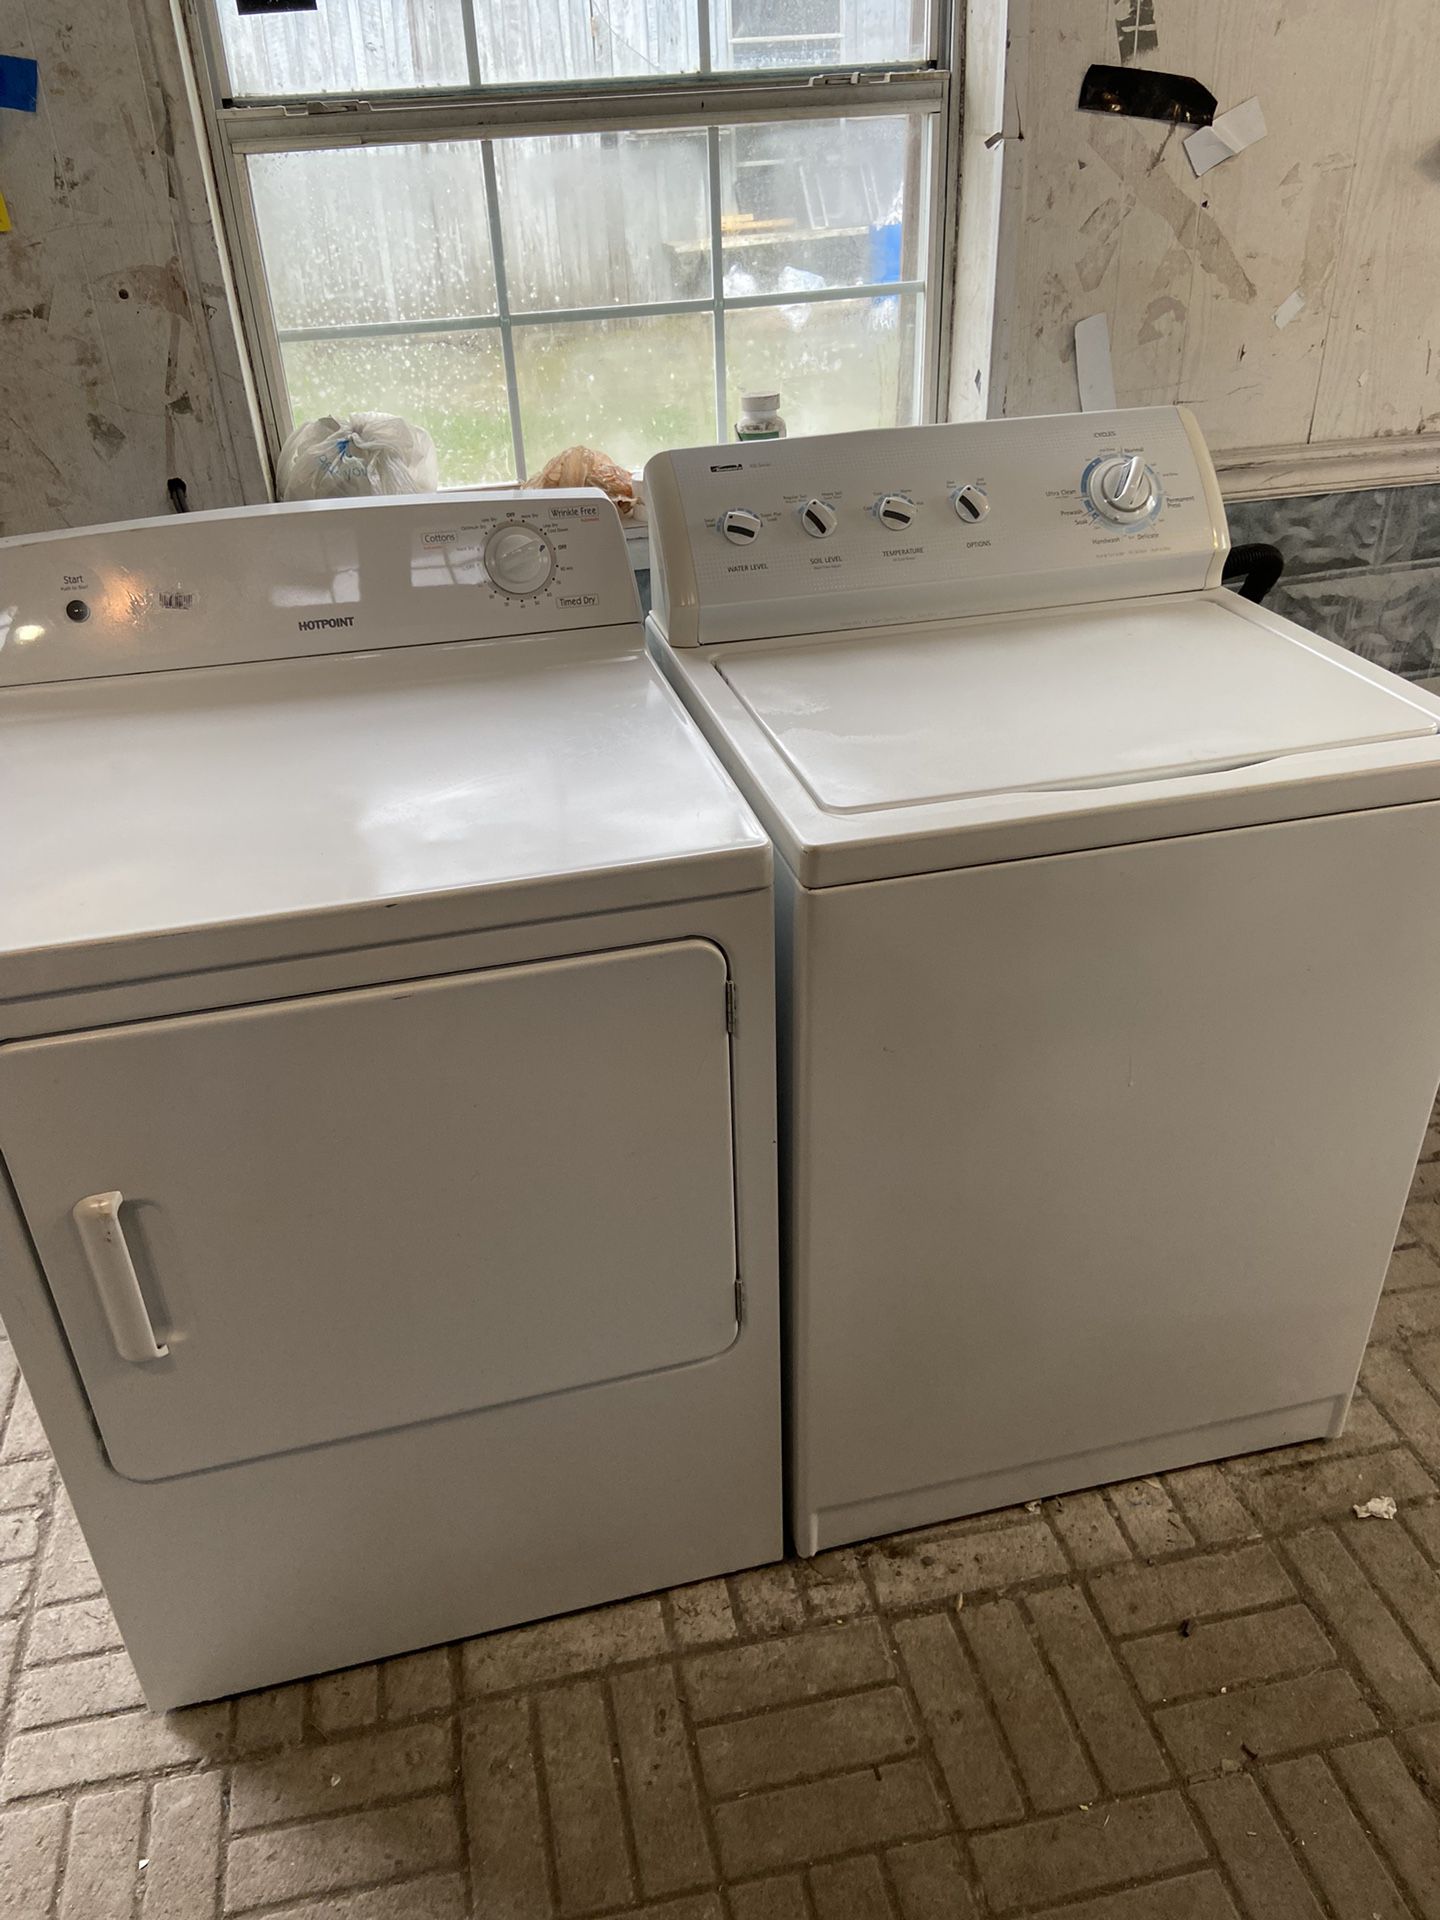 EXCELLENT RUNNING SUPER LOAD SIZE KENMORE WASHER & G.E. HOTPOINT ELECTRIC DRYER. BOTH RUN LIKE BRAND NEW! NO ISSUES WITH EITHER!